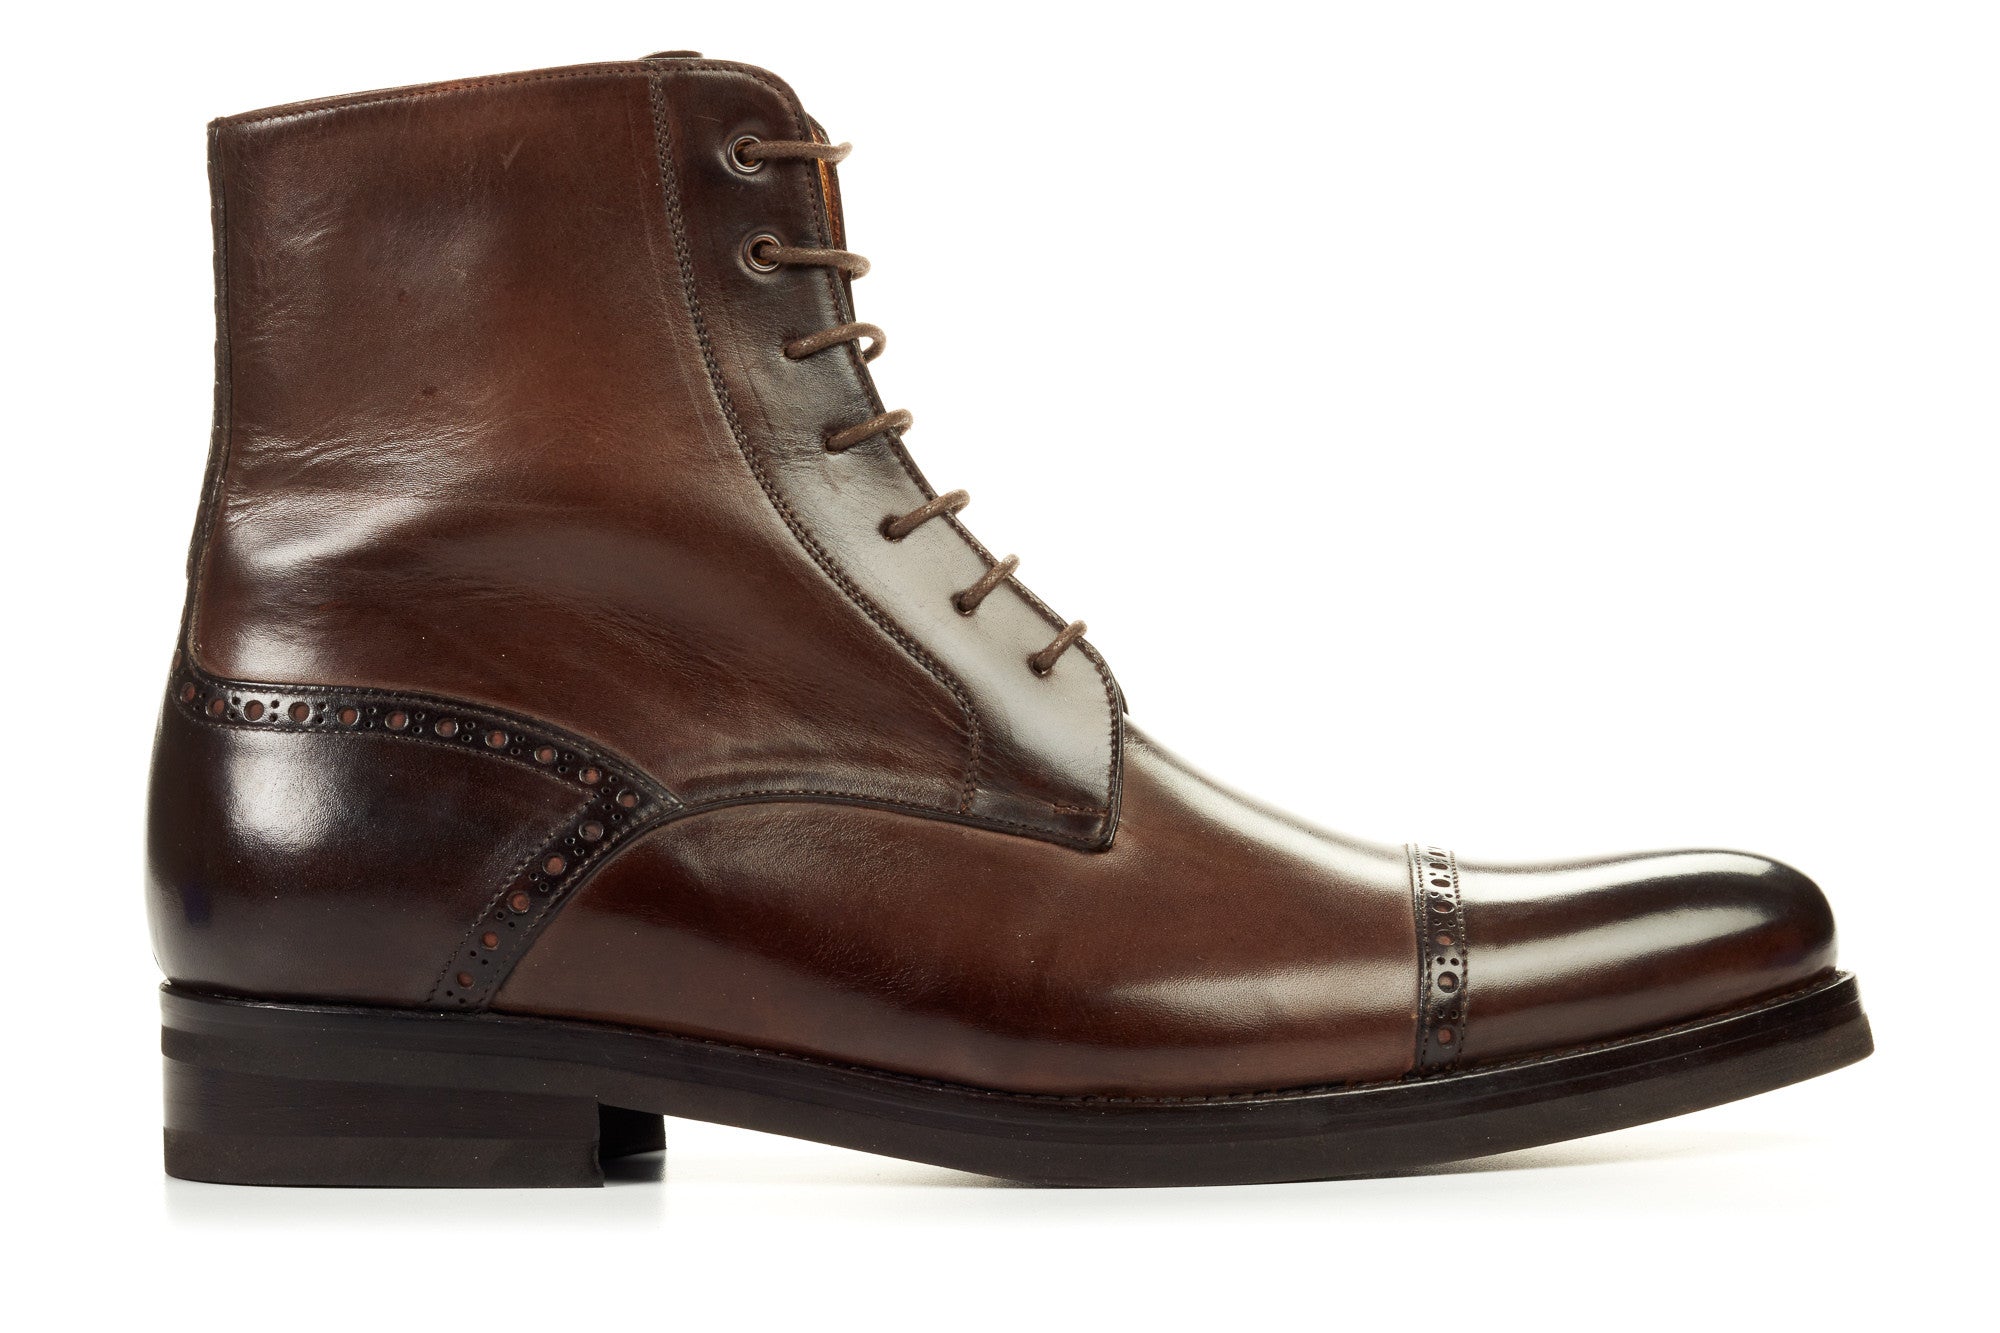 The Presley Lace-Up Boot - Chocolate - Rubber Sole